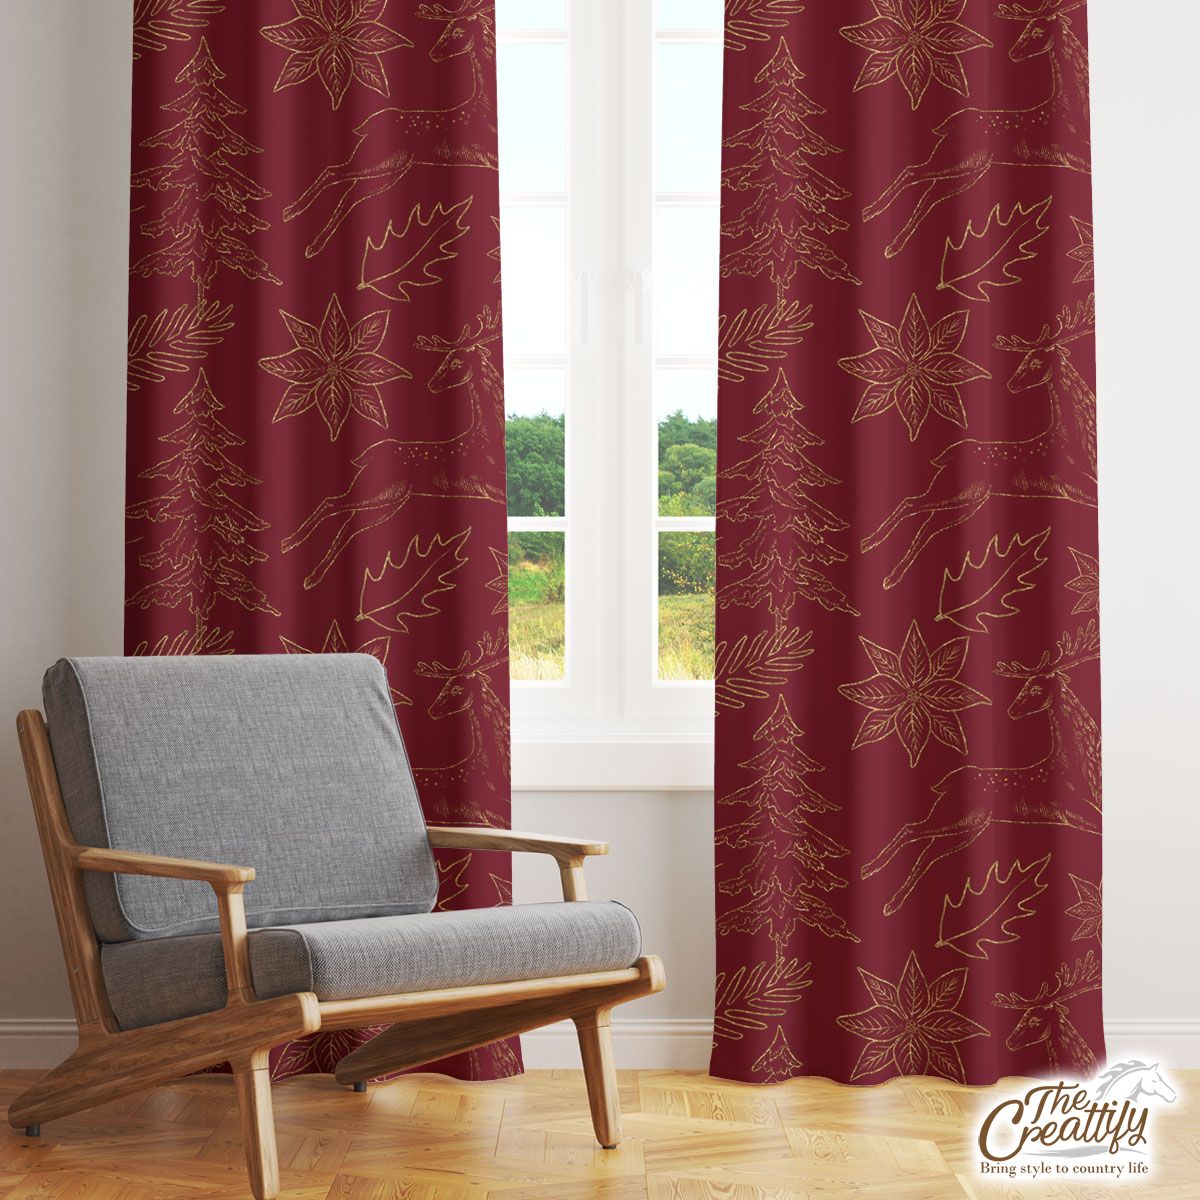 Poinsettia, Deer And Holly Leaf Pattern Window Curtain